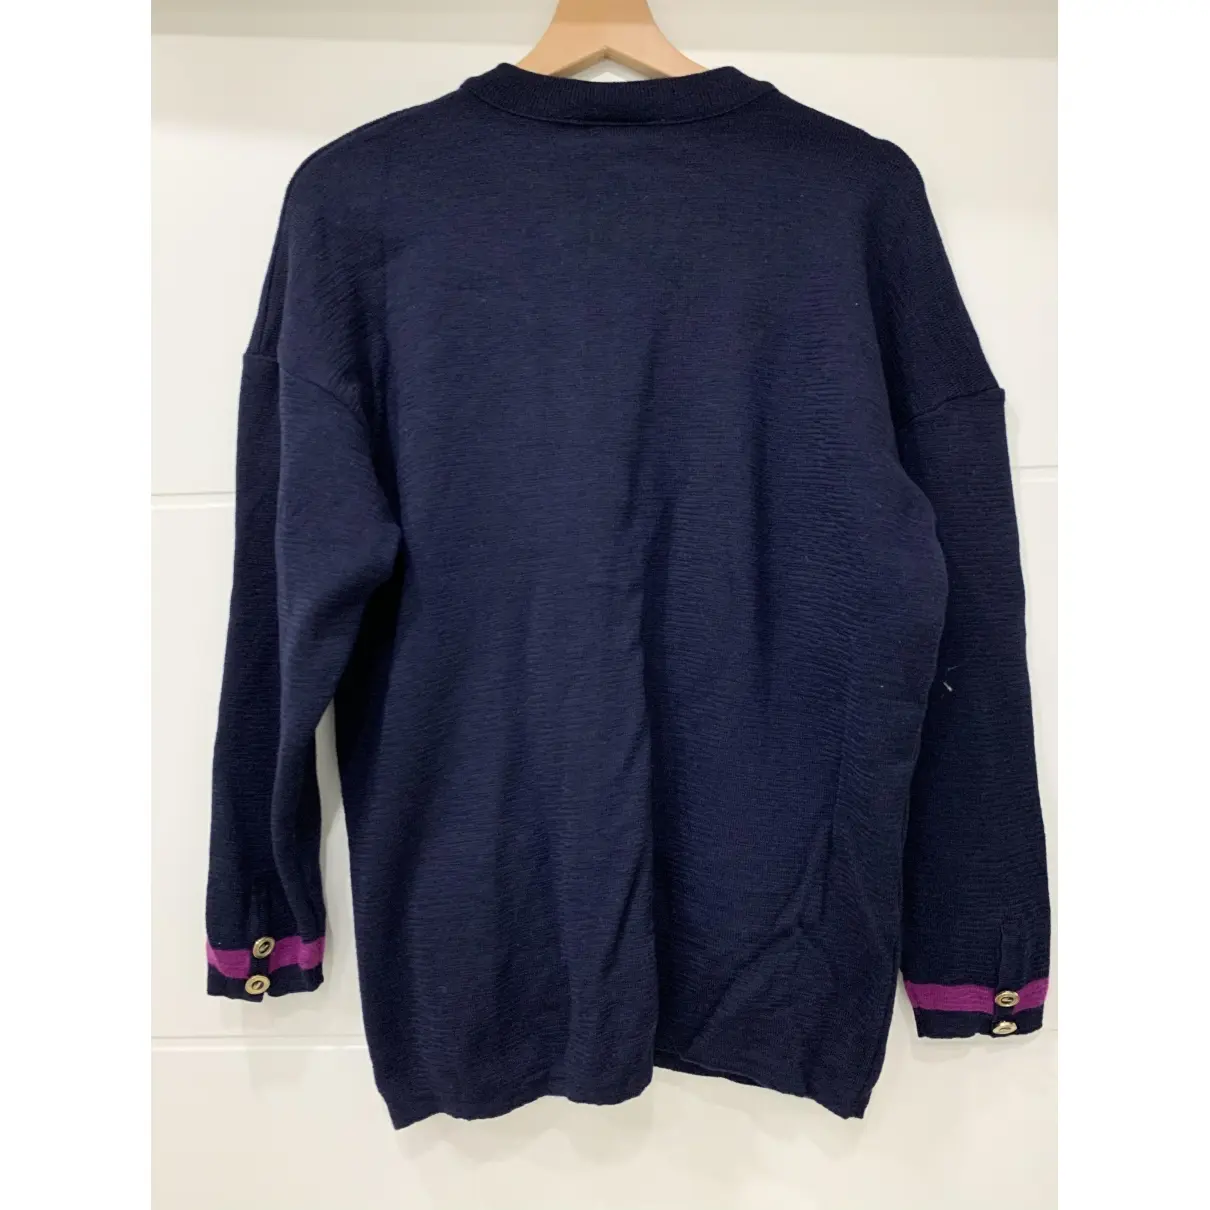 Lacoste Wool cardigan for sale - Vintage